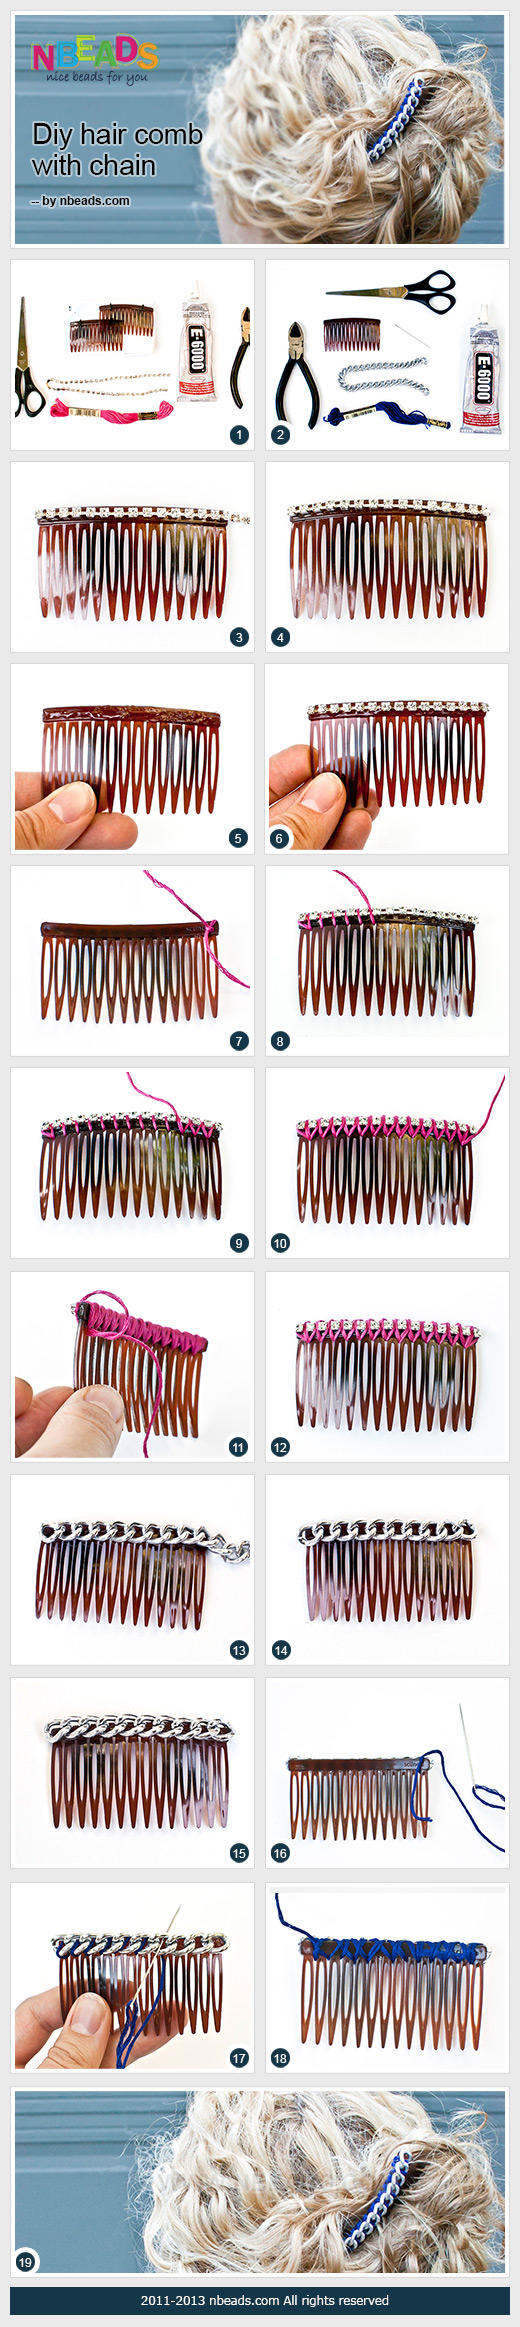 diy hair comb with chain